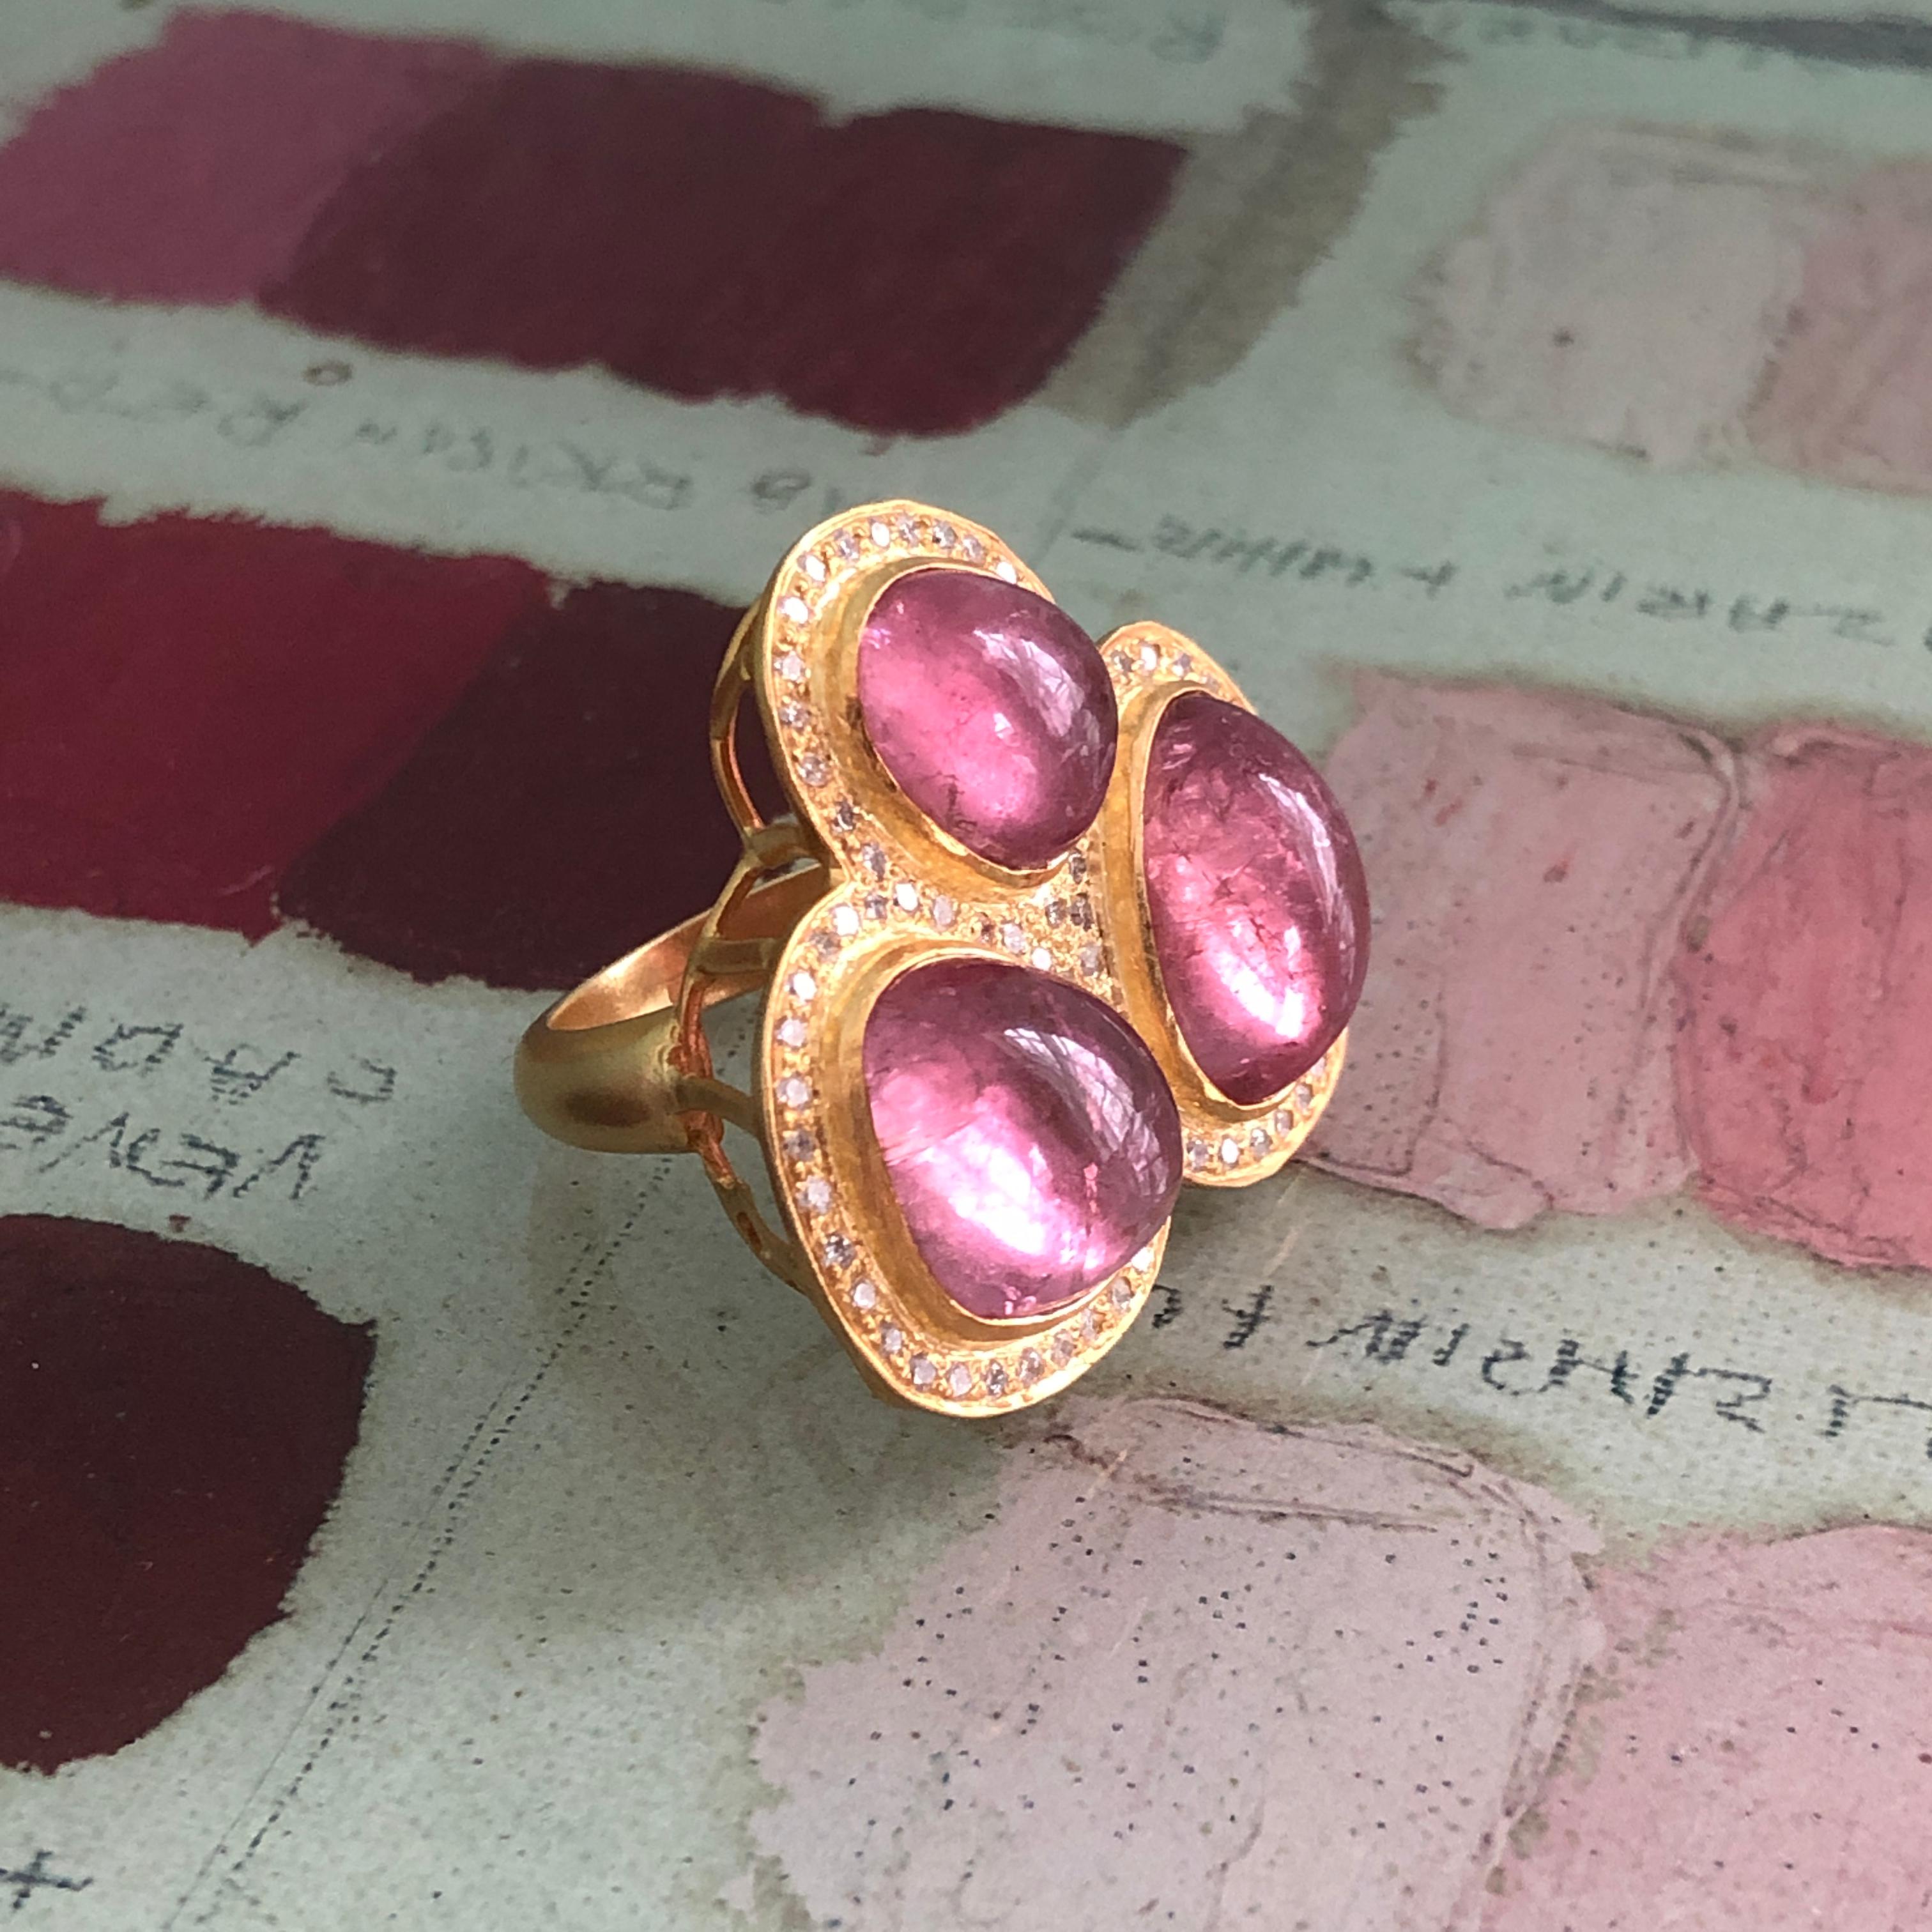 22.91 Carats of spectacular Pink Tourmaline cabochons are at the center of this statement ring design, surrounded by .81 carats Diamonds and Lauren Harper's signature warm matte 18 kt Gold.  This ring is a true wow ring!  Size 7.  Ships directly